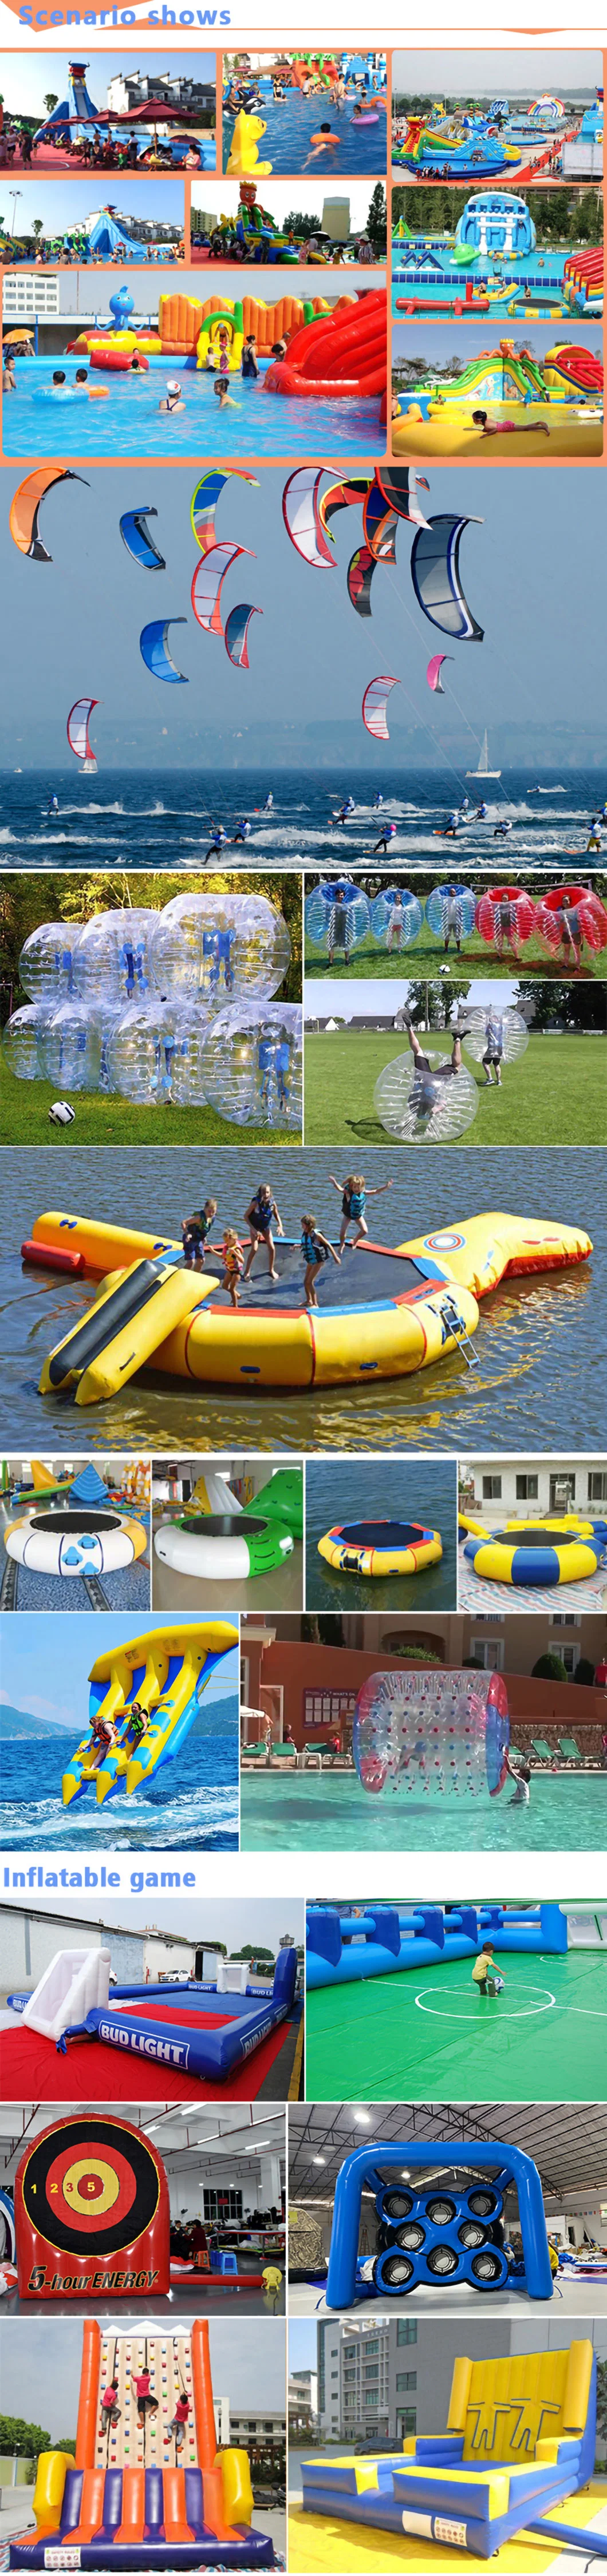 Inflatable Rabbit Pool Float Swimming Float 2 People Play Water Sports Equipment Water Floating Entertainment Toy